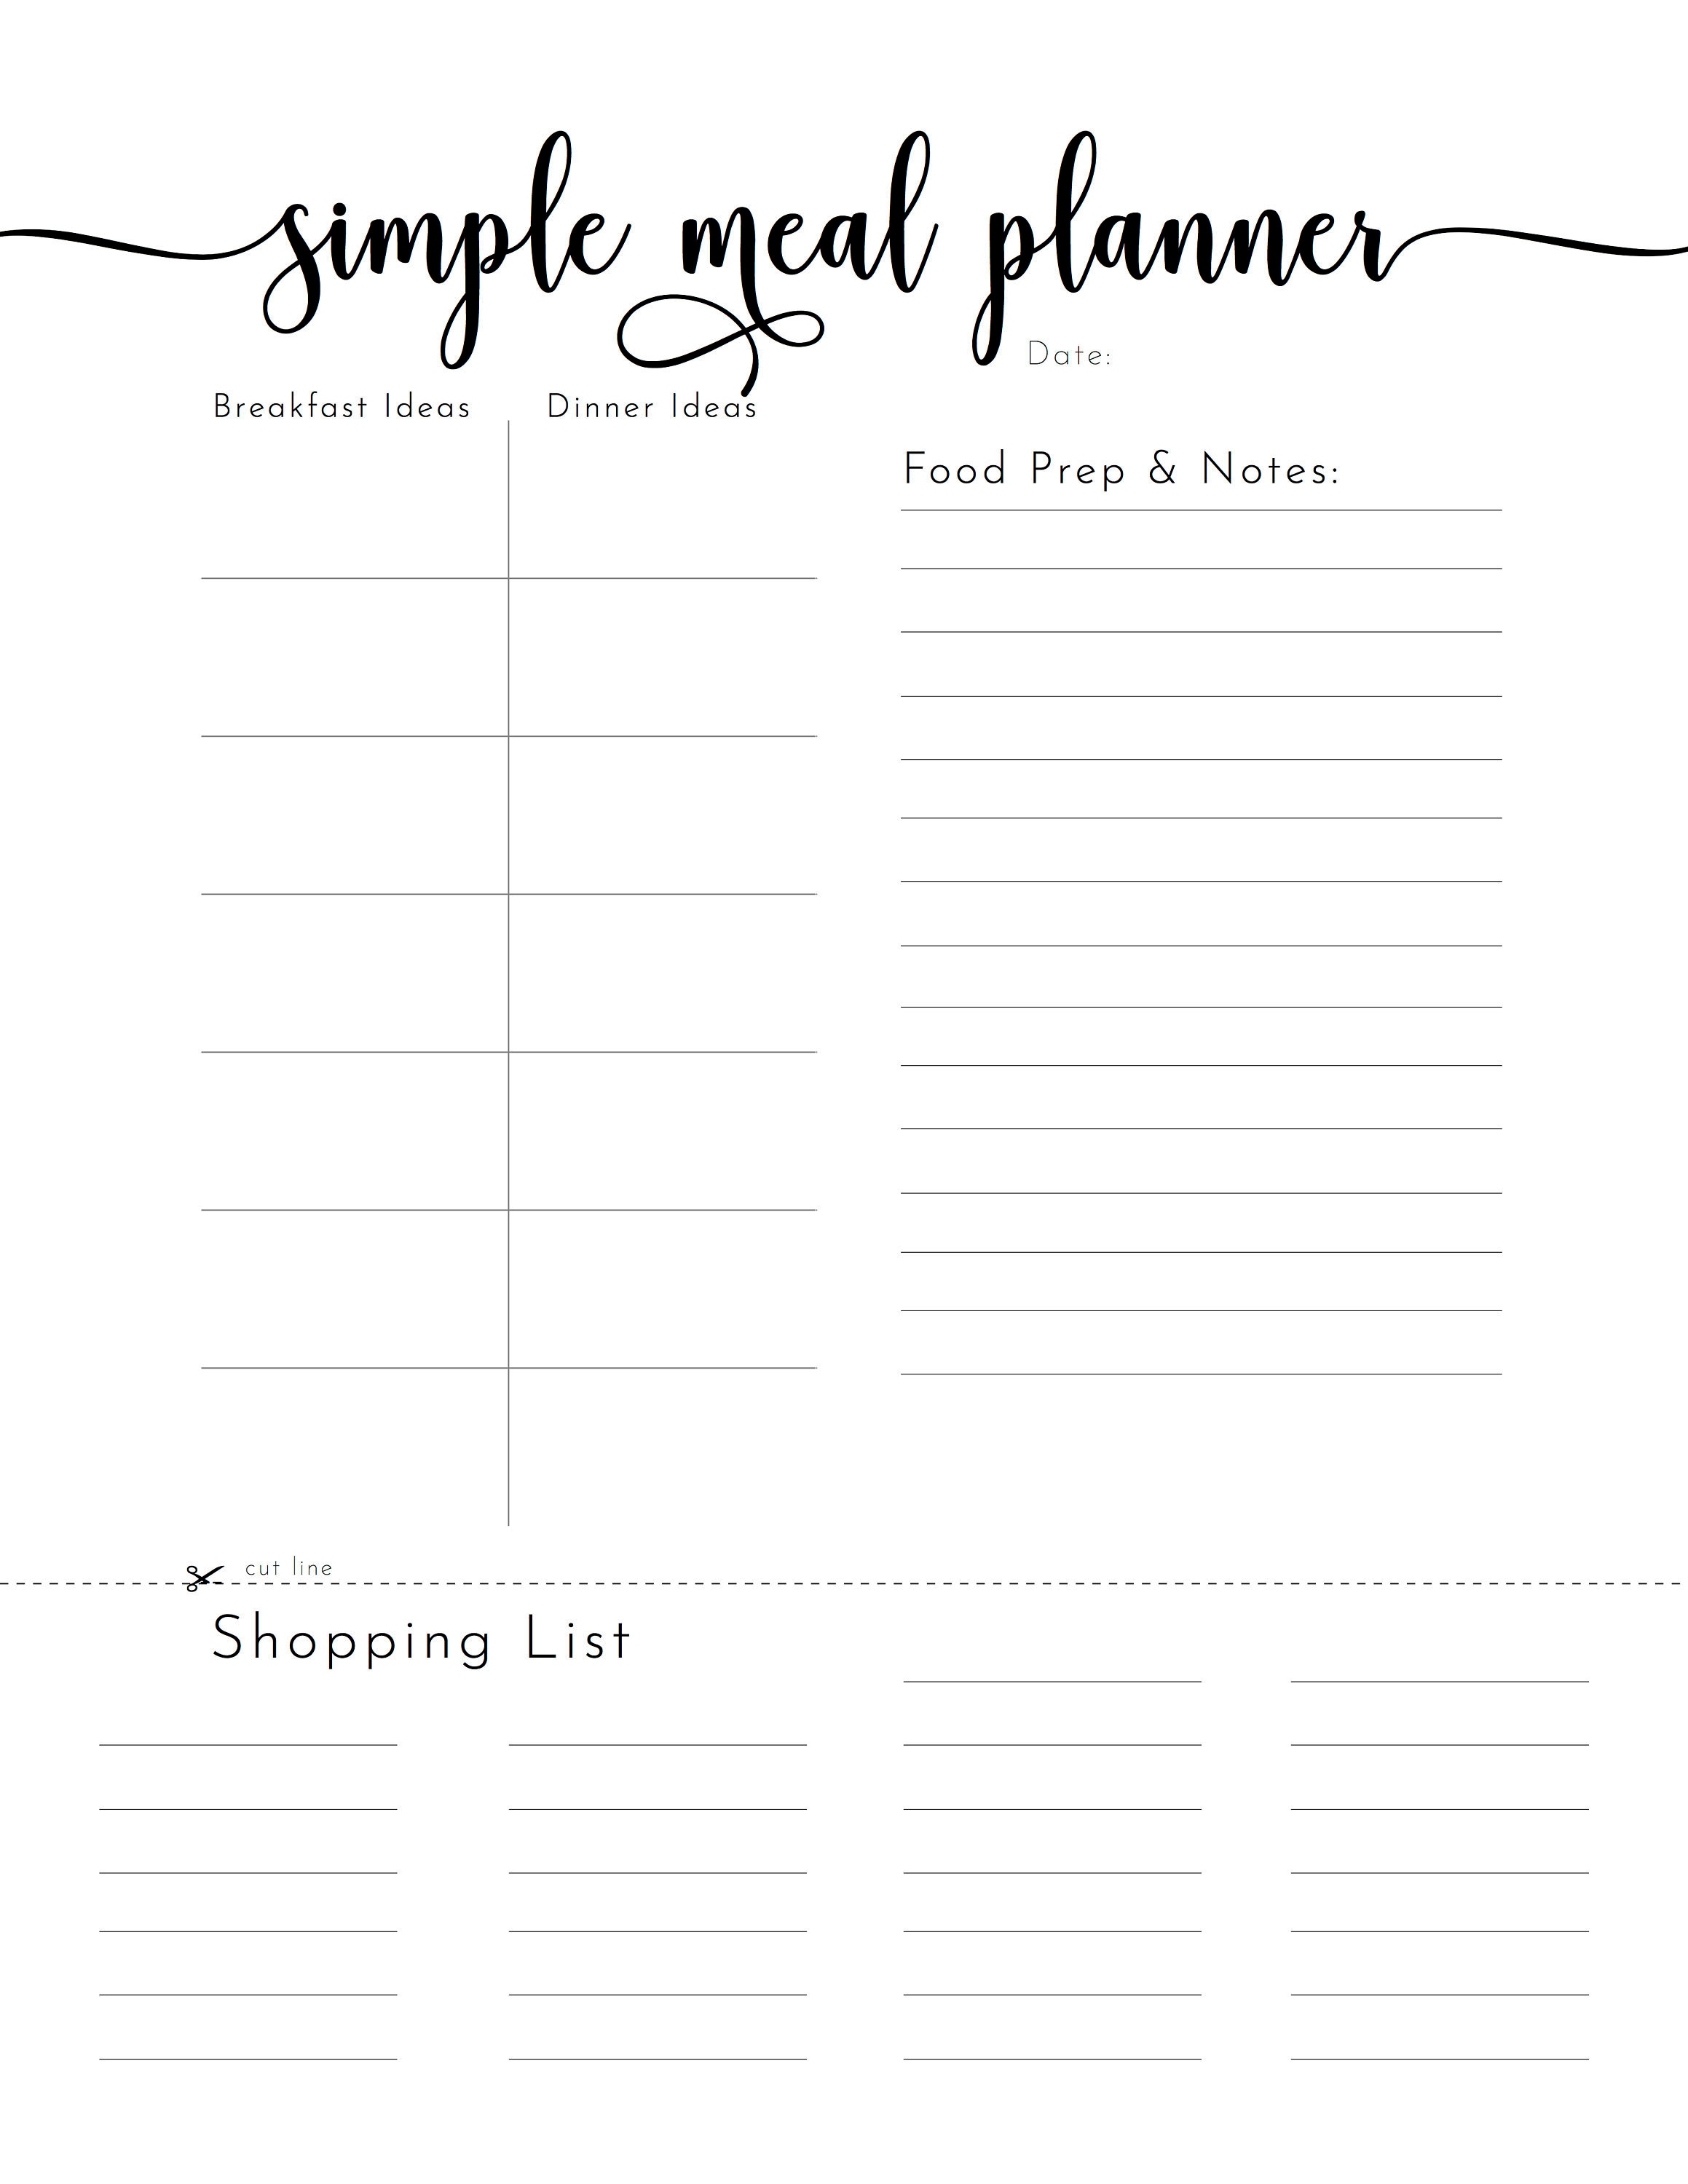 simple-meal-planner-printable-weekly-meal-plan-shopping-list-etsy